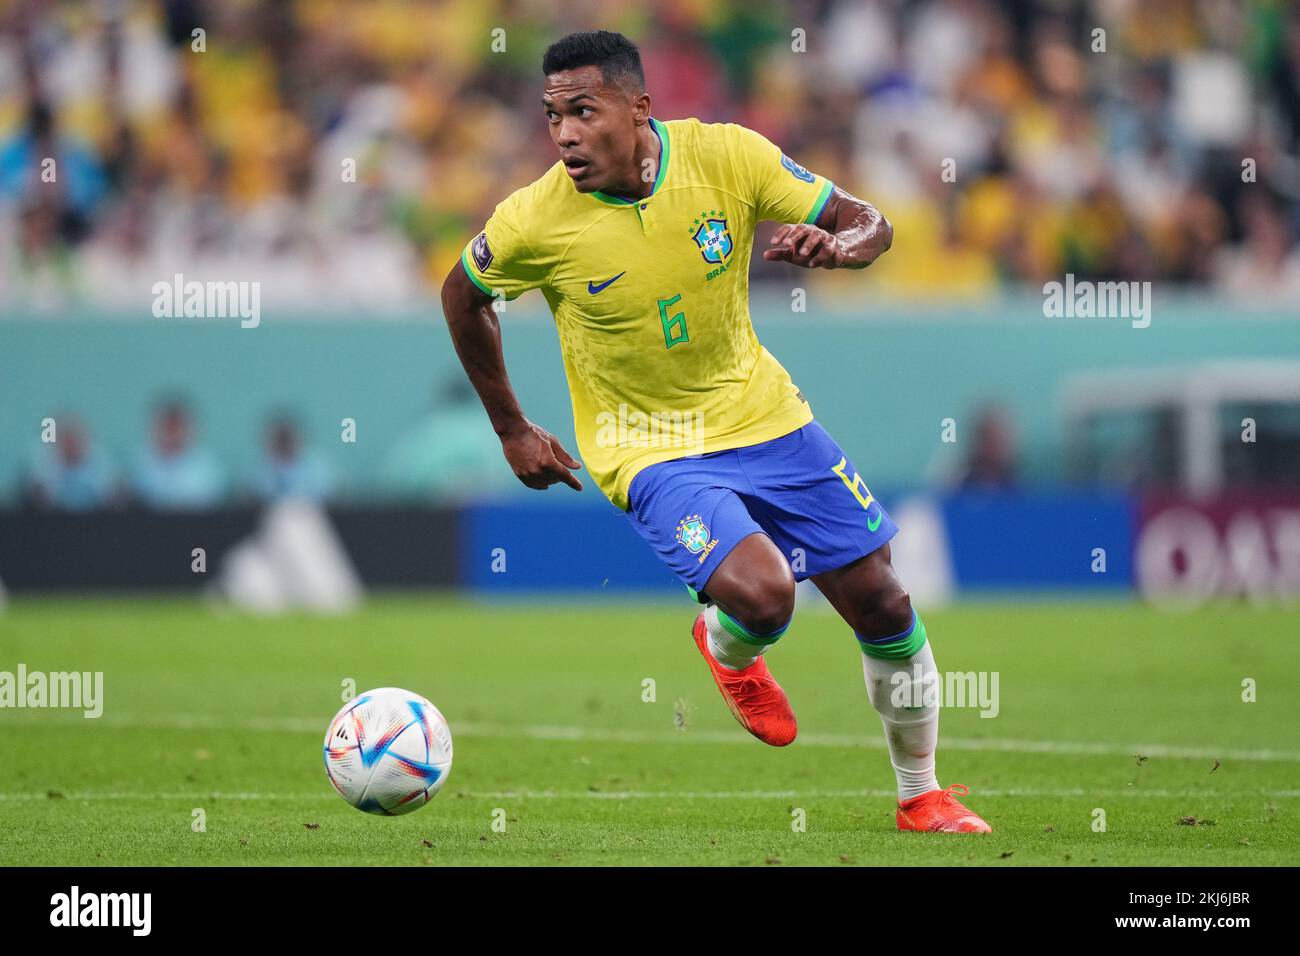 Alex Sandro of Brazil during the FIFA World Cup Qatar 2022 match, Group G, between Brazil and Serbia played at Lusail Stadium on Nov 24, 2022 in Lusail, Qatar. (Photo by Bagu Blanco / PRESSIN) Credit: PRESSINPHOTO SPORTS AGENCY/Alamy Live News Stock Photo